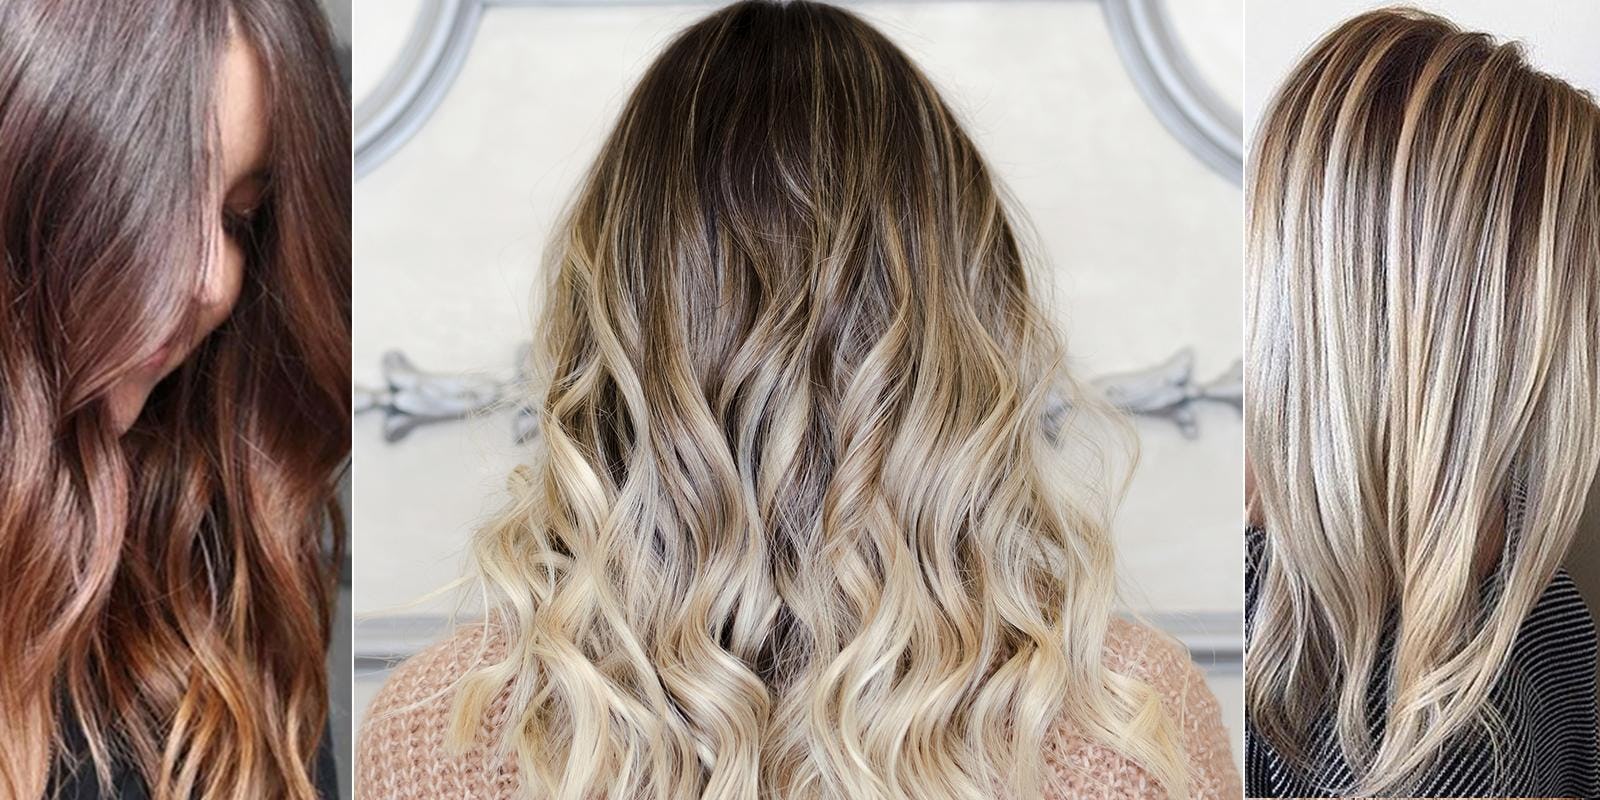 How to Grow Out Your Natural Hair Color, According to Experts